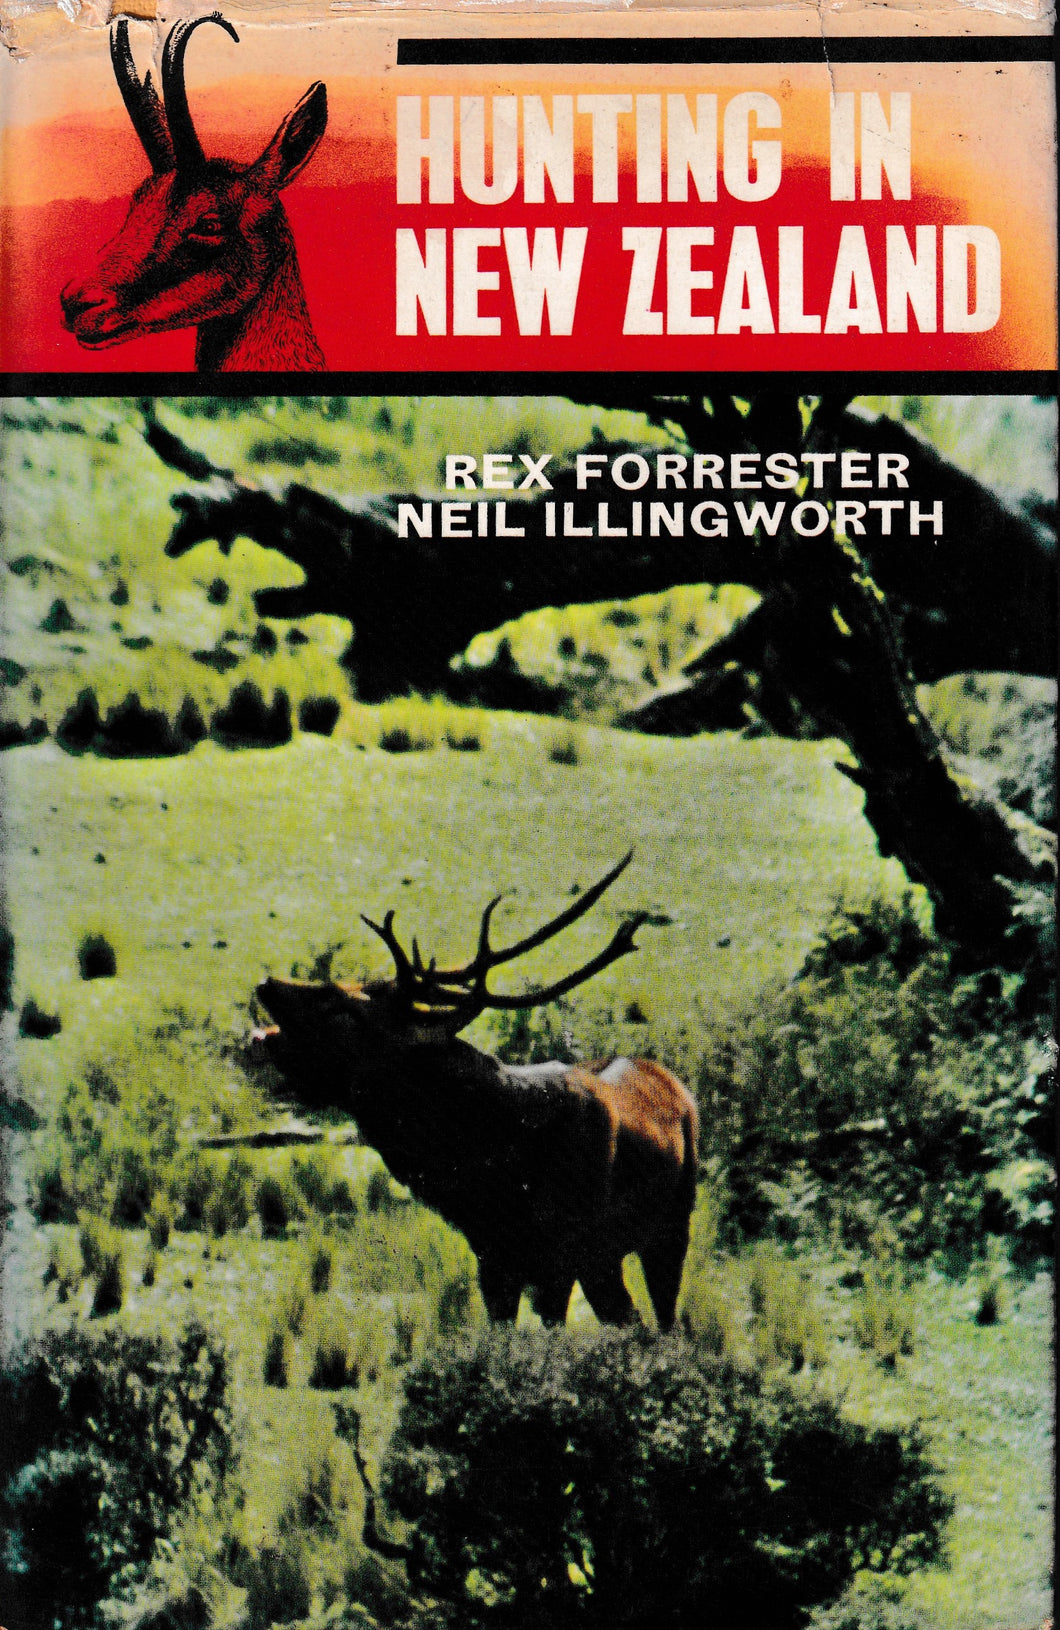 Hunting In New Zealand | Rex Forrester & Neil Illingworth